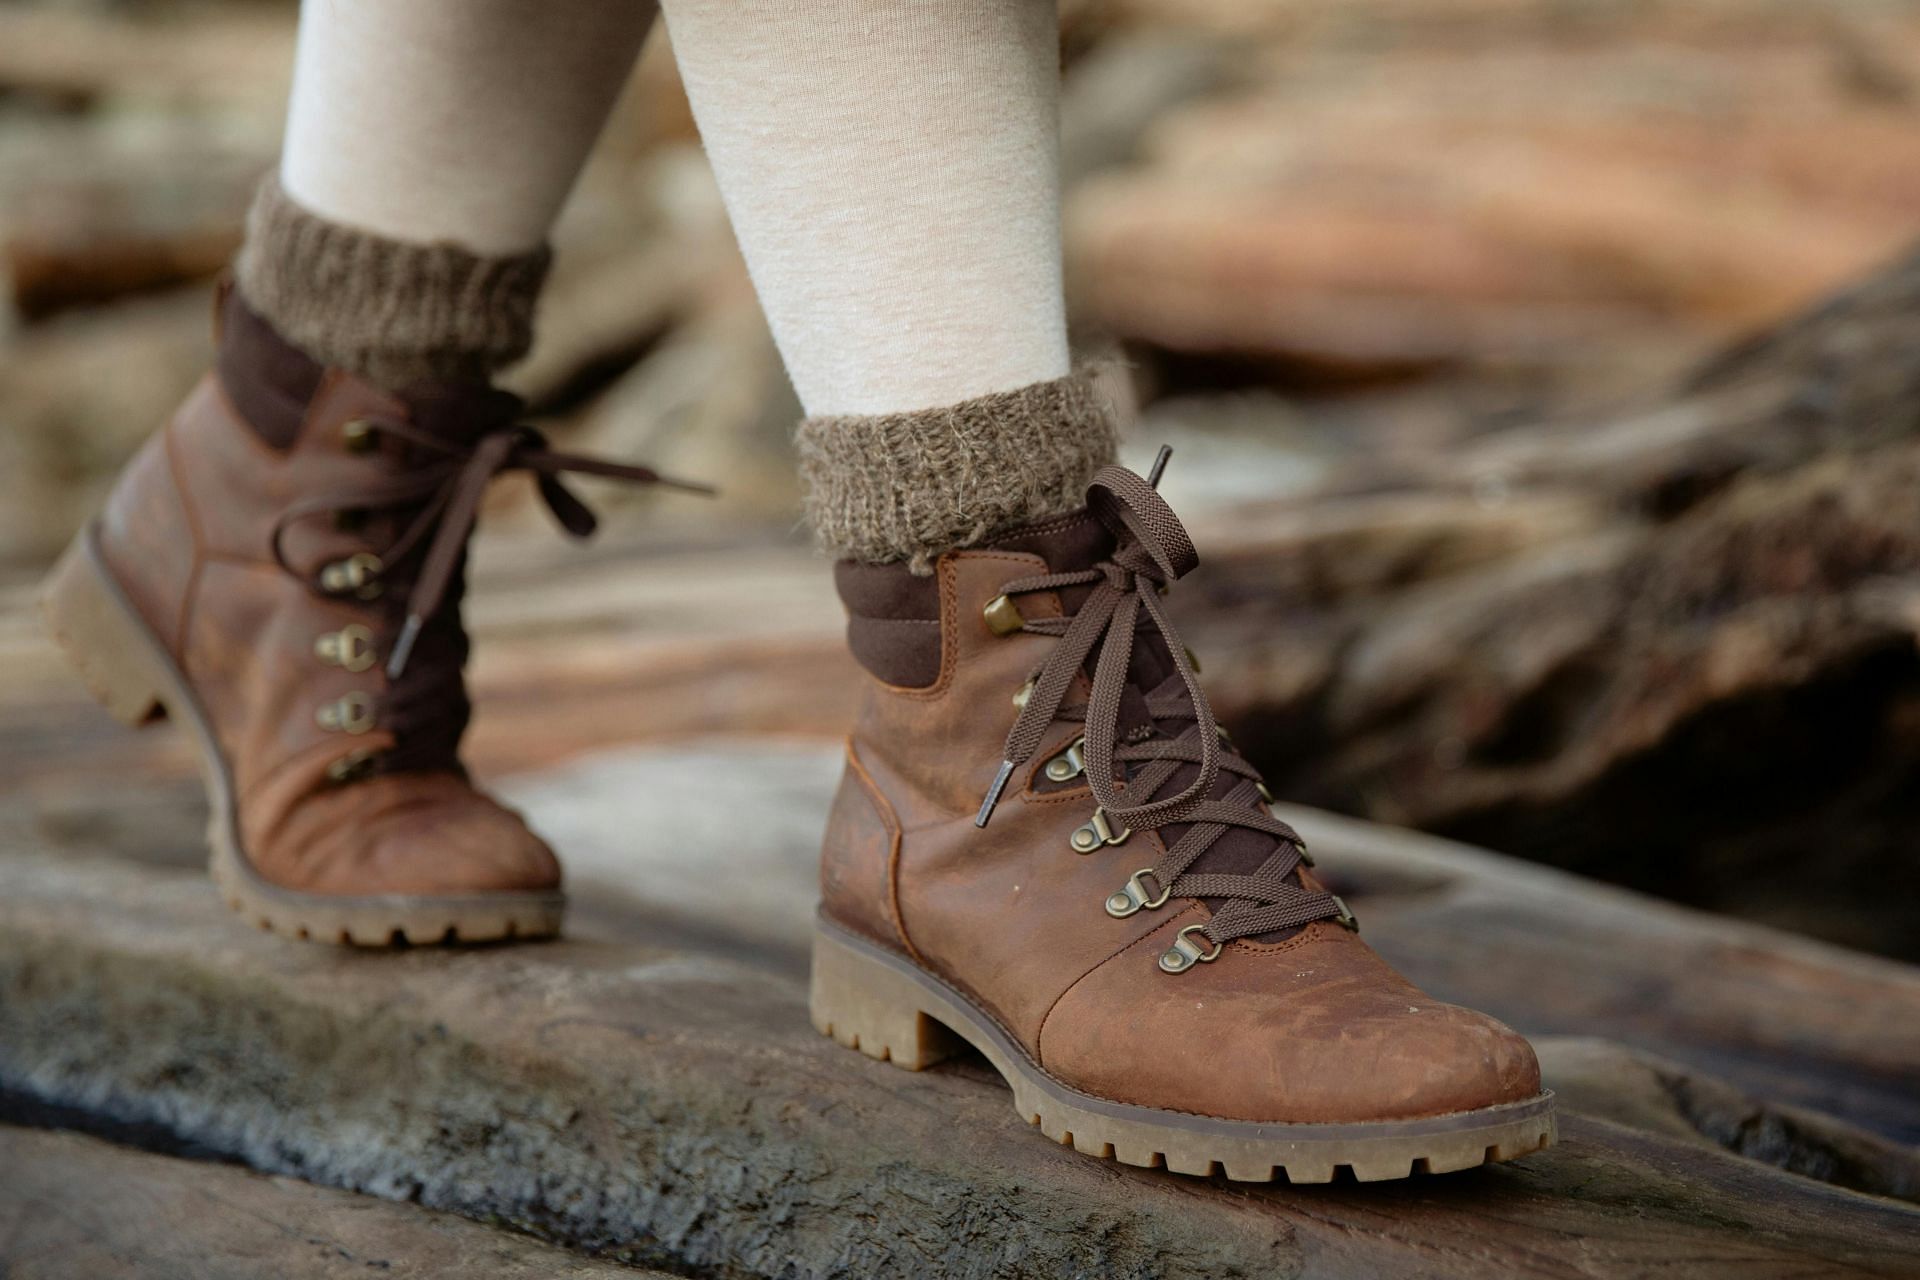 why are my toes always cold (image sourced via Pexels / Photo by tatiana)